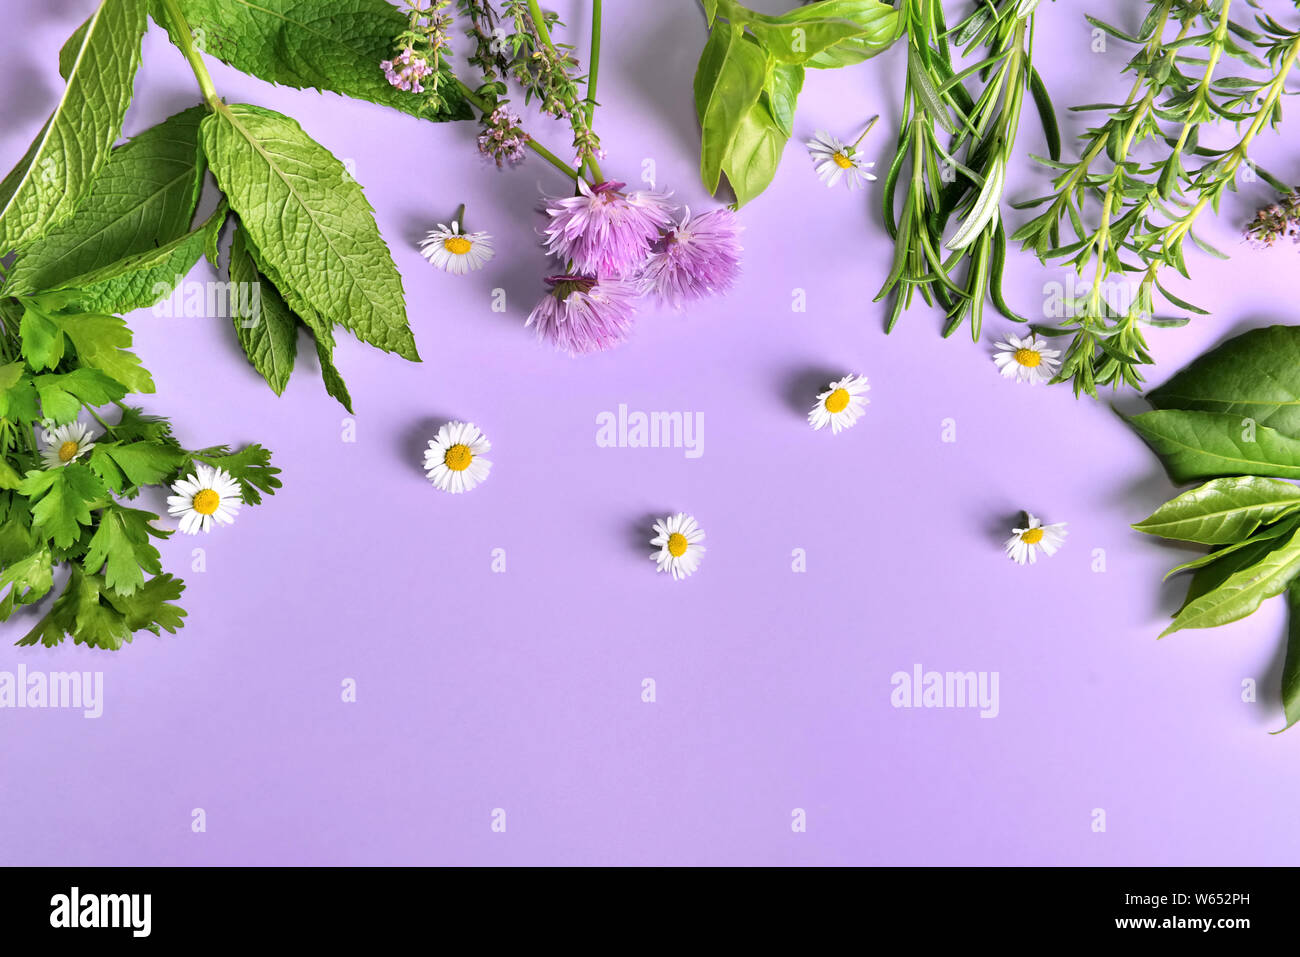 various aromatic fresh herbs with little daisies on purple background Stock Photo